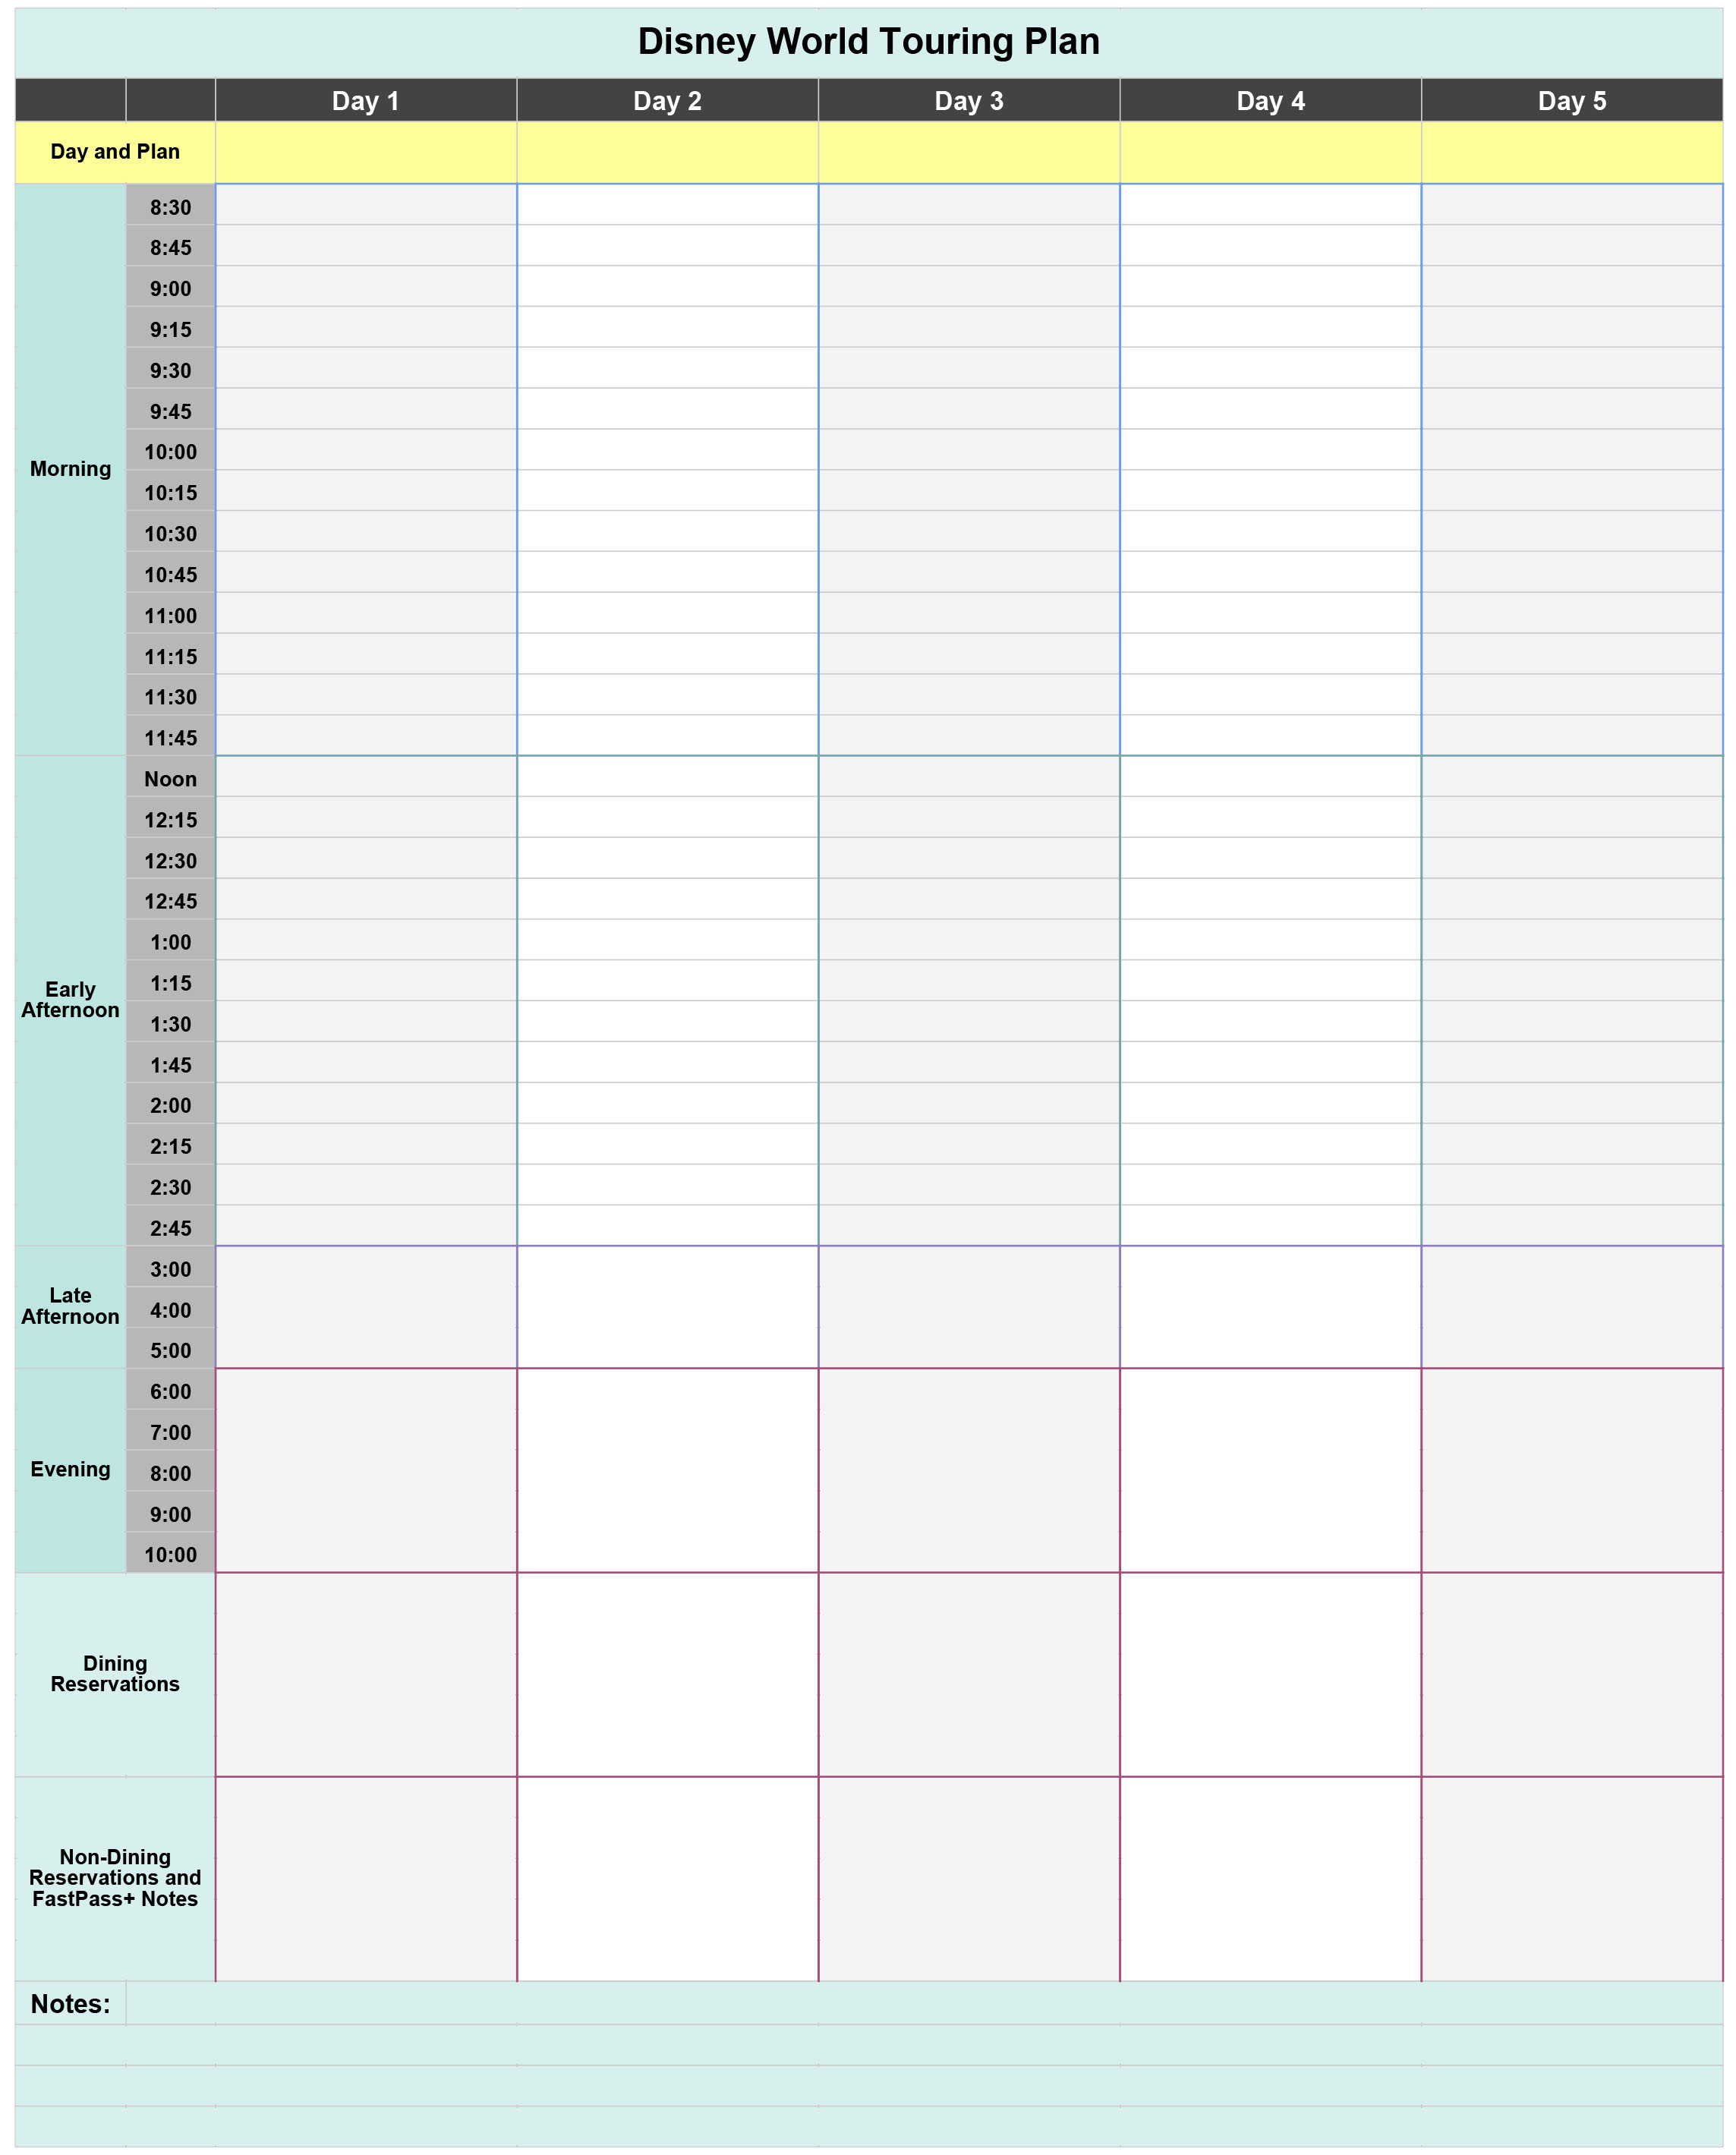 Disney Planning Spreadsheet Download With Free Disney World Touring Plan Spreadsheet  Wit  Wander